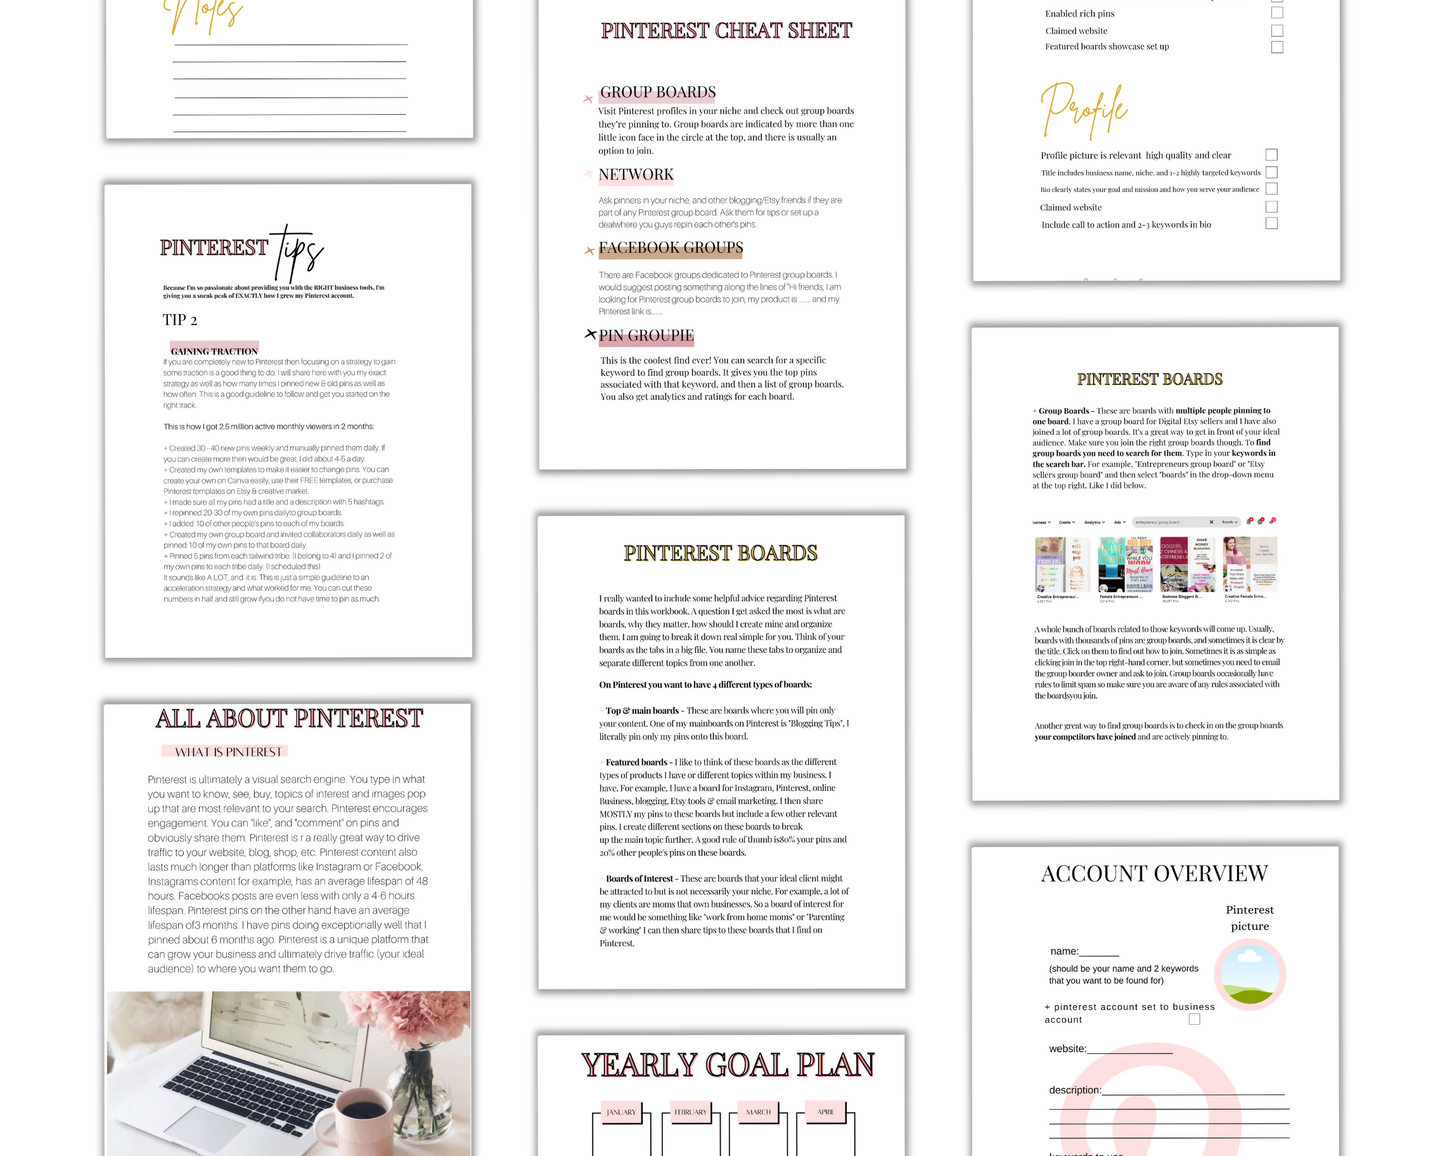 The Power of Pinterest Playbook